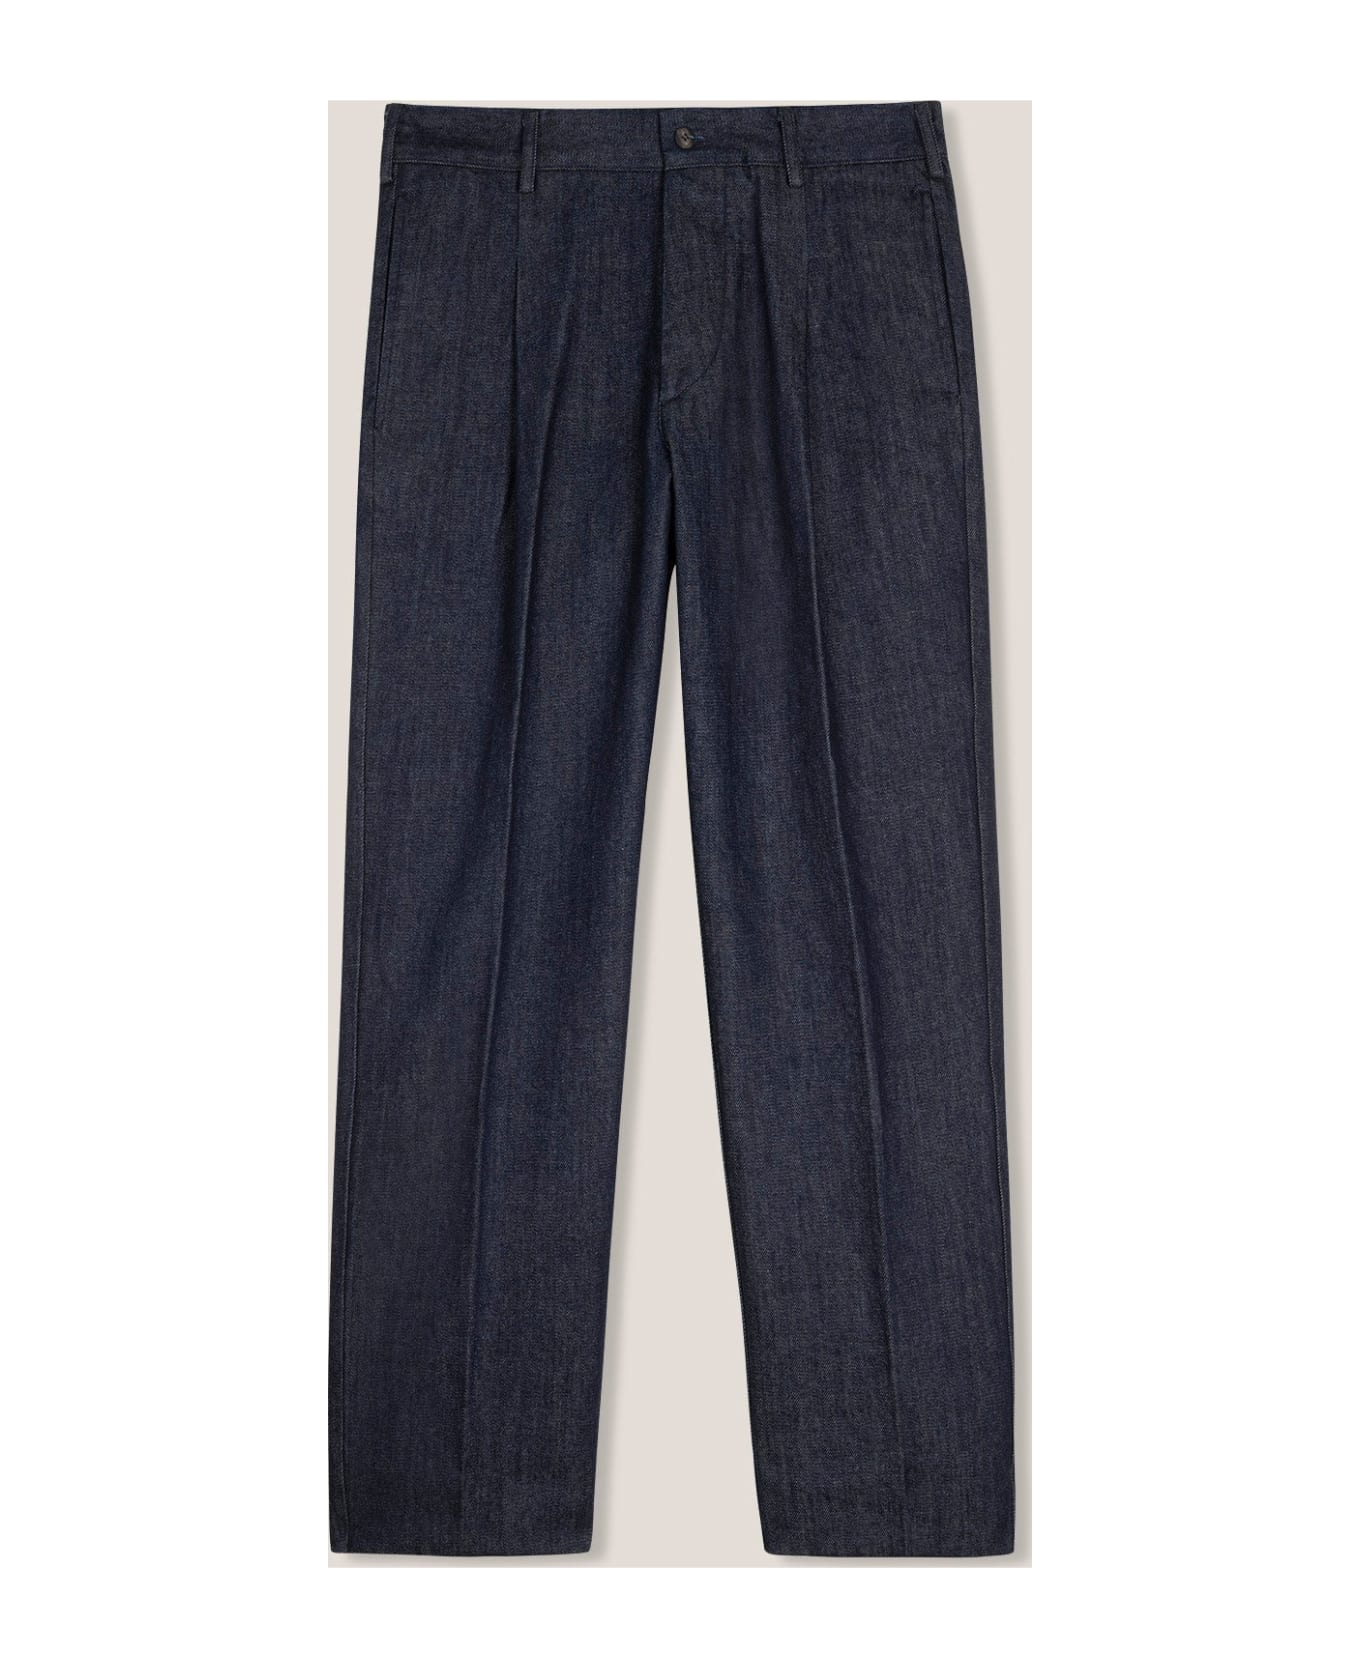 doppiaa Aantioco Pleated Cotton Denim Stretch tapered Trousers